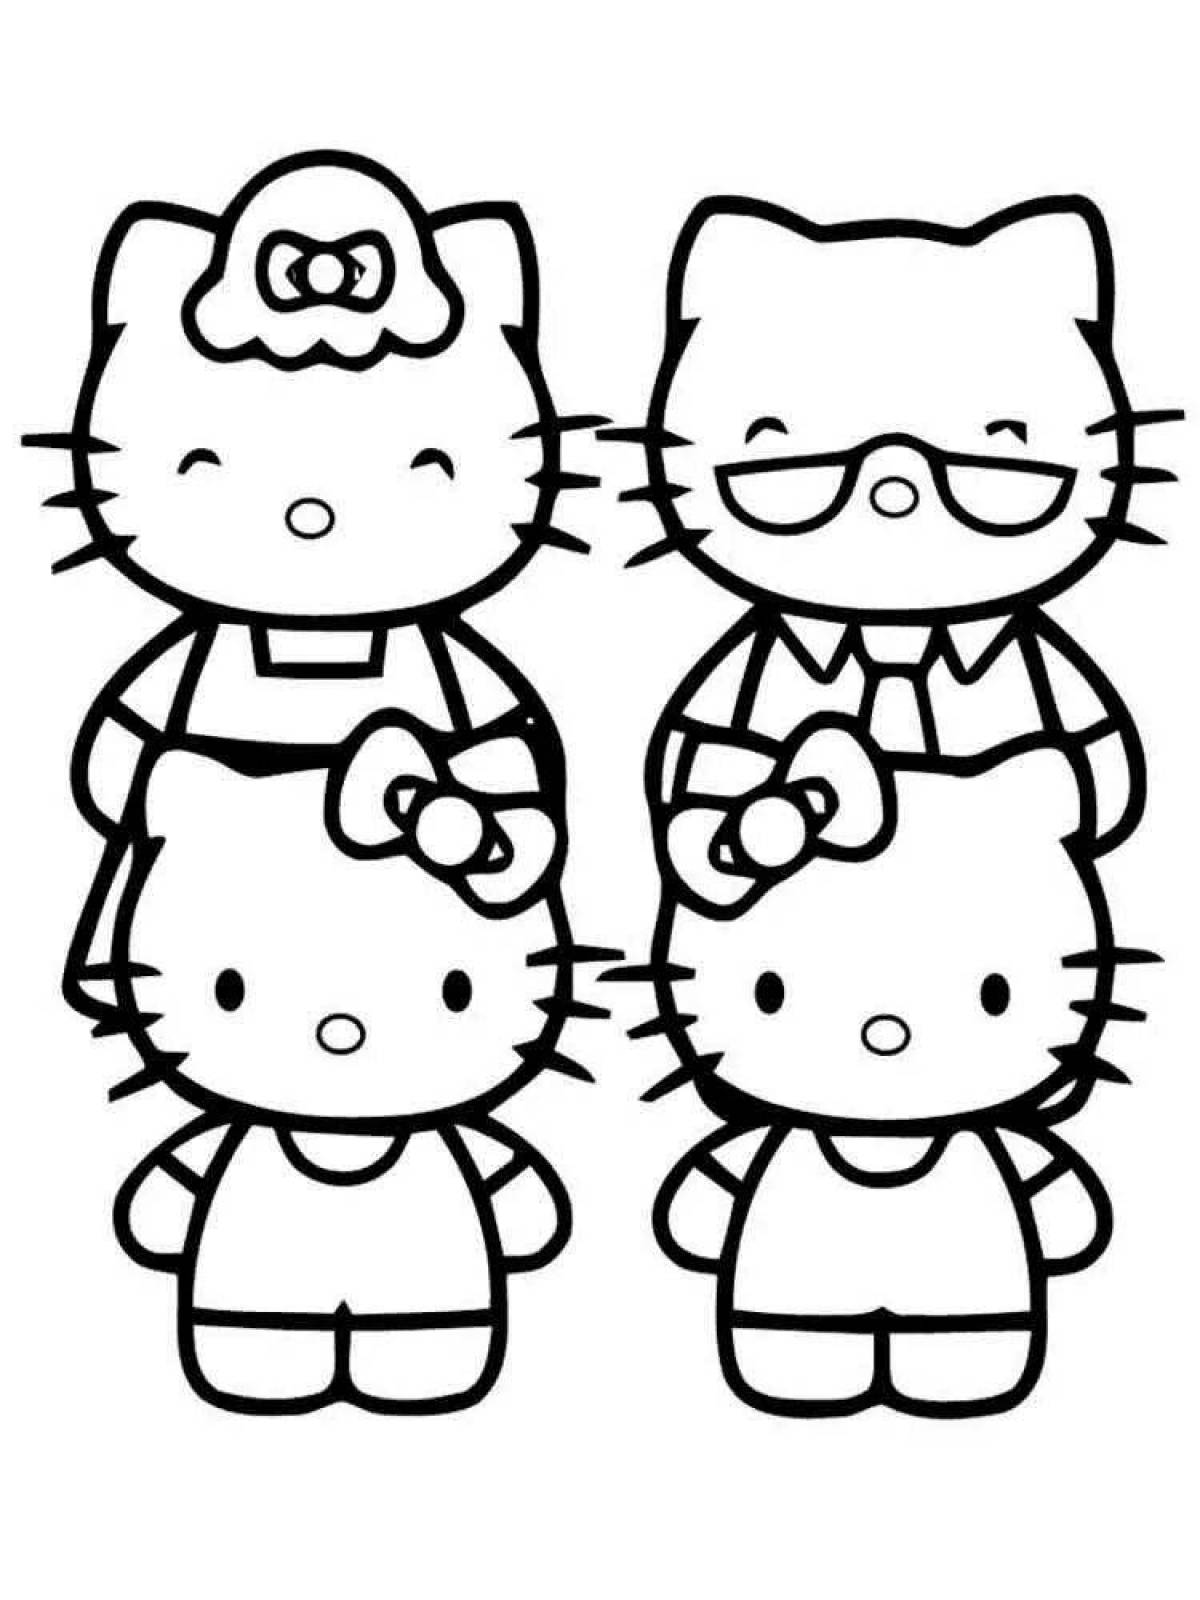 Cute hello kitty and her friends coloring book